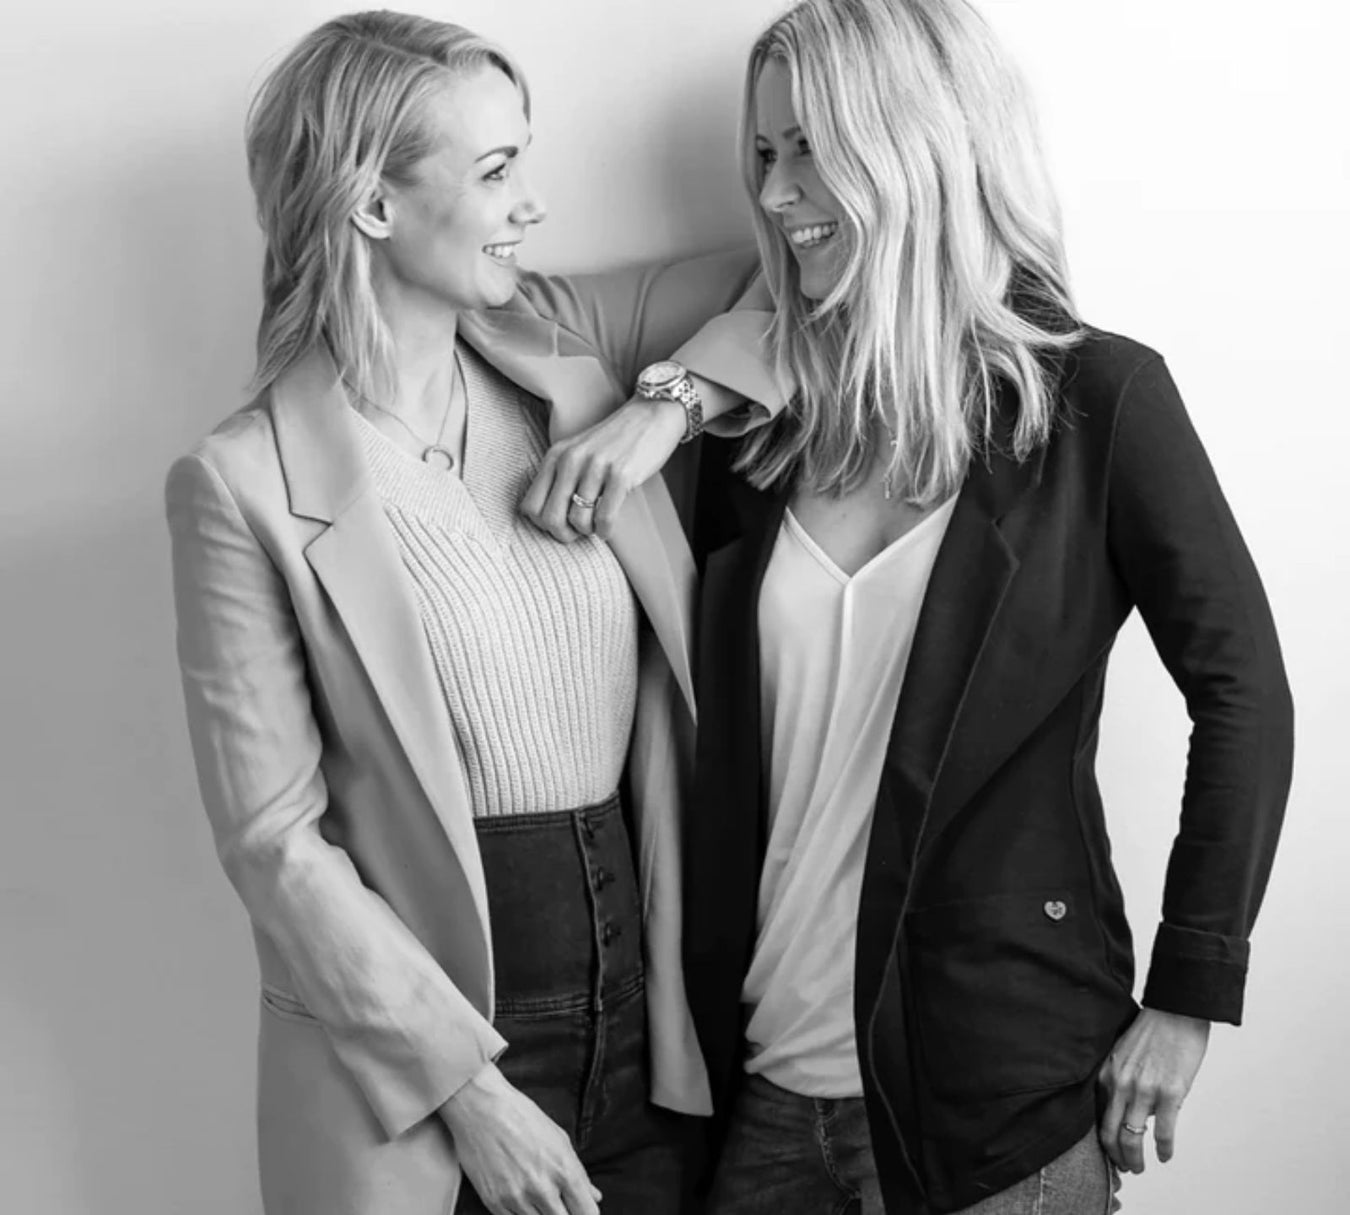 Lola&Lykke's Co-founders: Laura on the left and Kati on the right